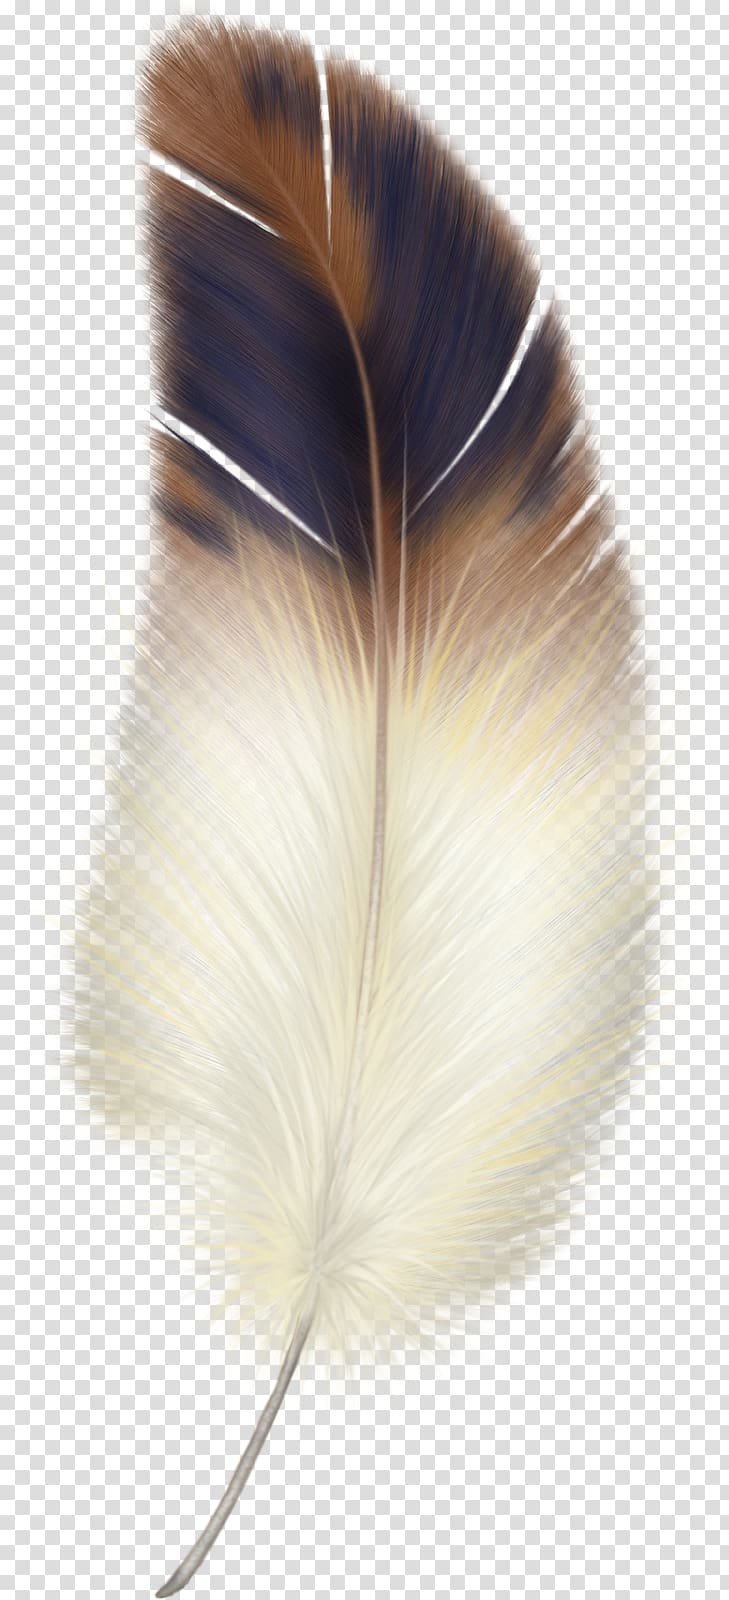 Bird Eagle feather law , Bird transparent background PNG clipart.